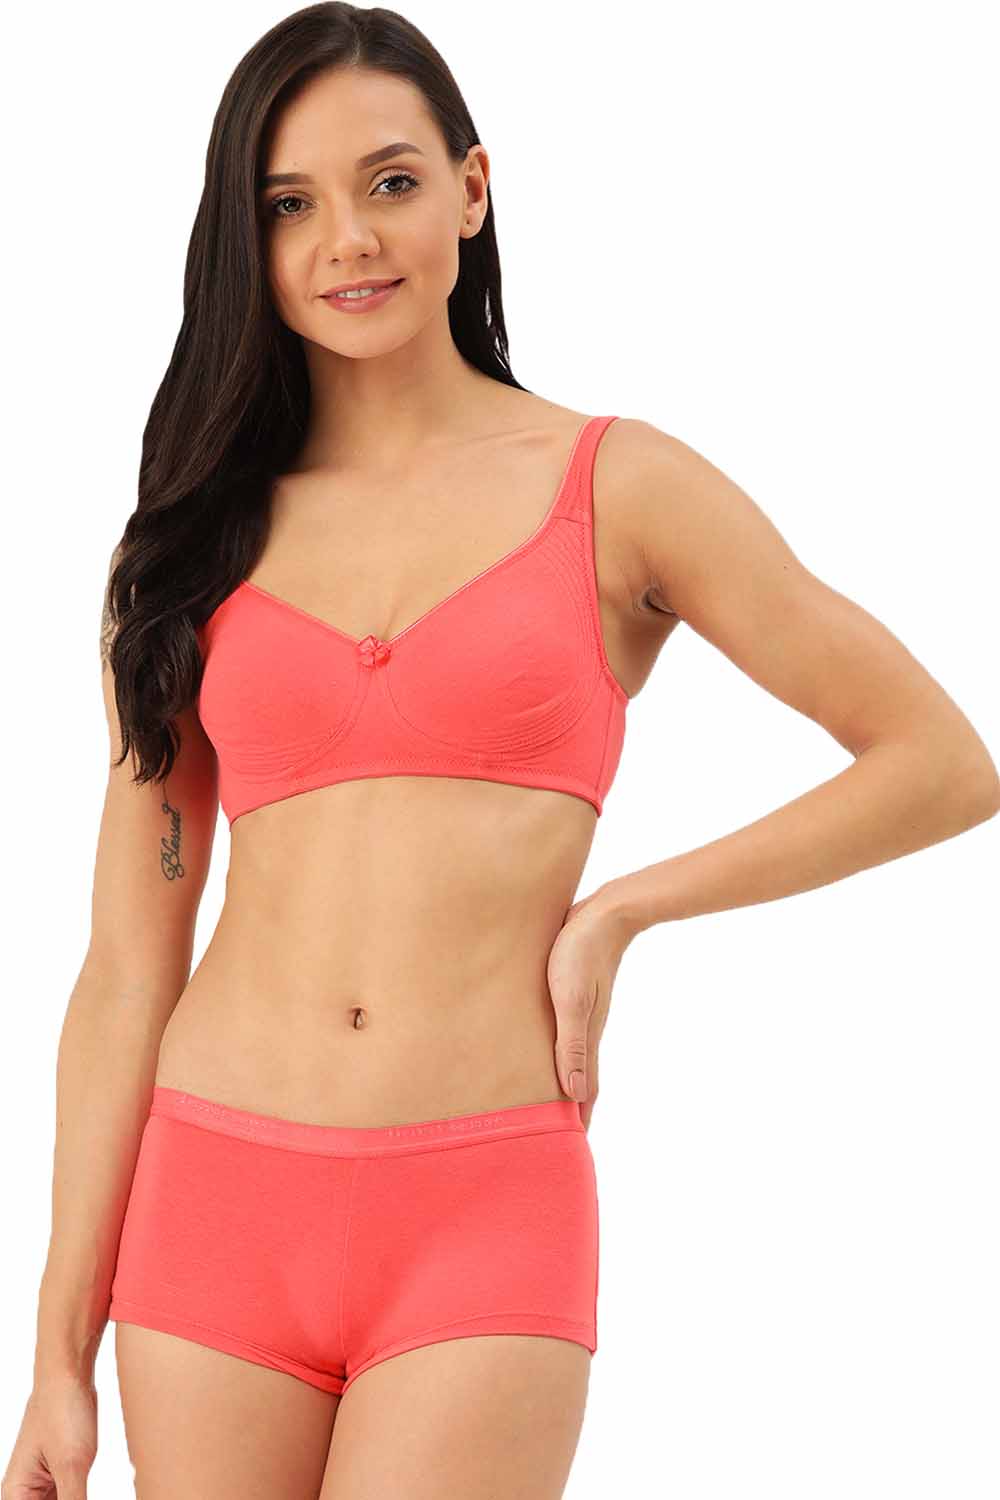 Buy Inner Sense Organic Cotton Antimicrobial Seamless Side Support Bra -  Pink online